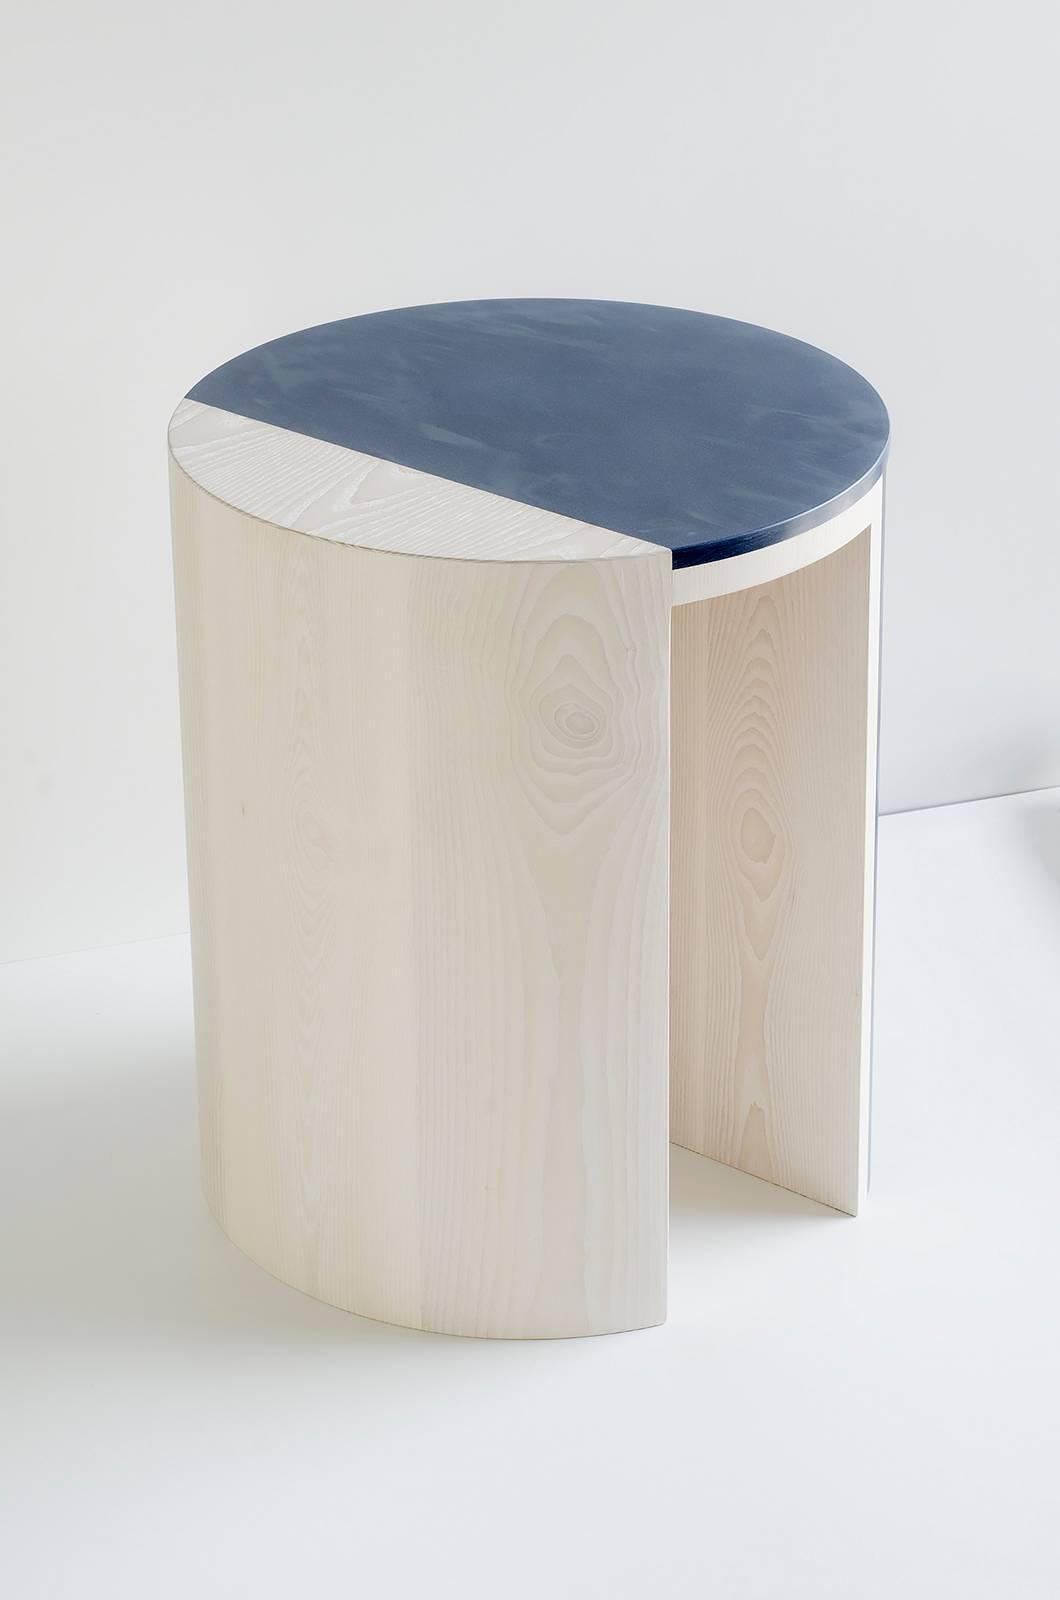 The Gibbous side table pairs wood and solid surface to create a complex and striking Silhouette. The table uses essential elements like the circle, volume, and line in surprising ways, creating a sense of movement through the piece. Lacquered